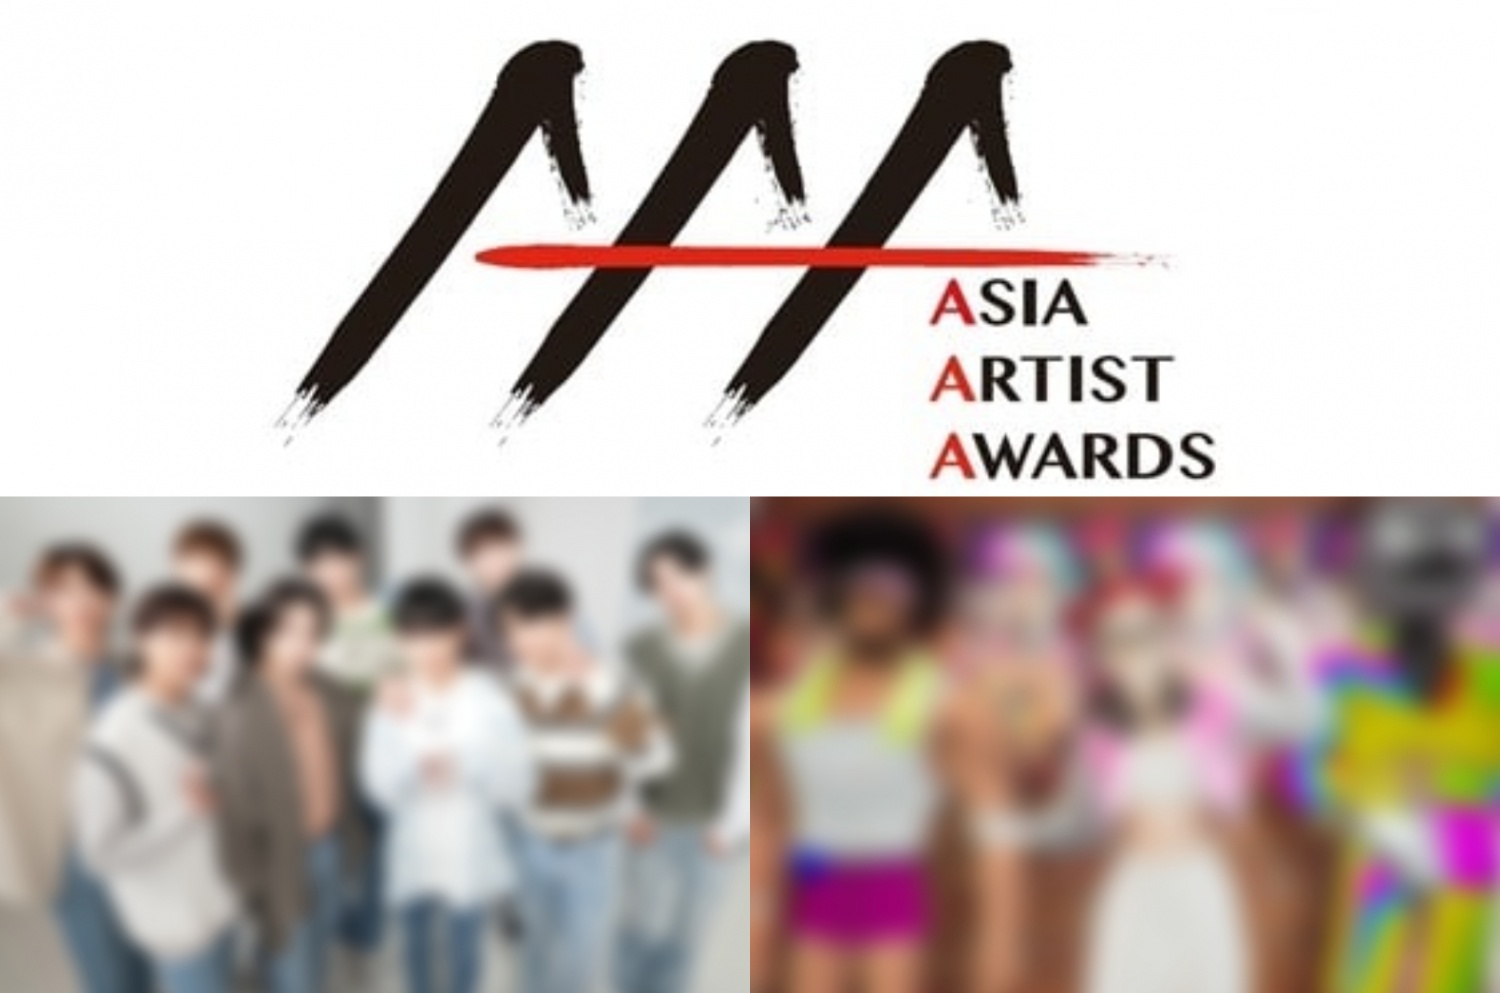 2022 Asia Artist Awards announces that 1 international group of boys and 1 virtual artist will participate in the ceremony